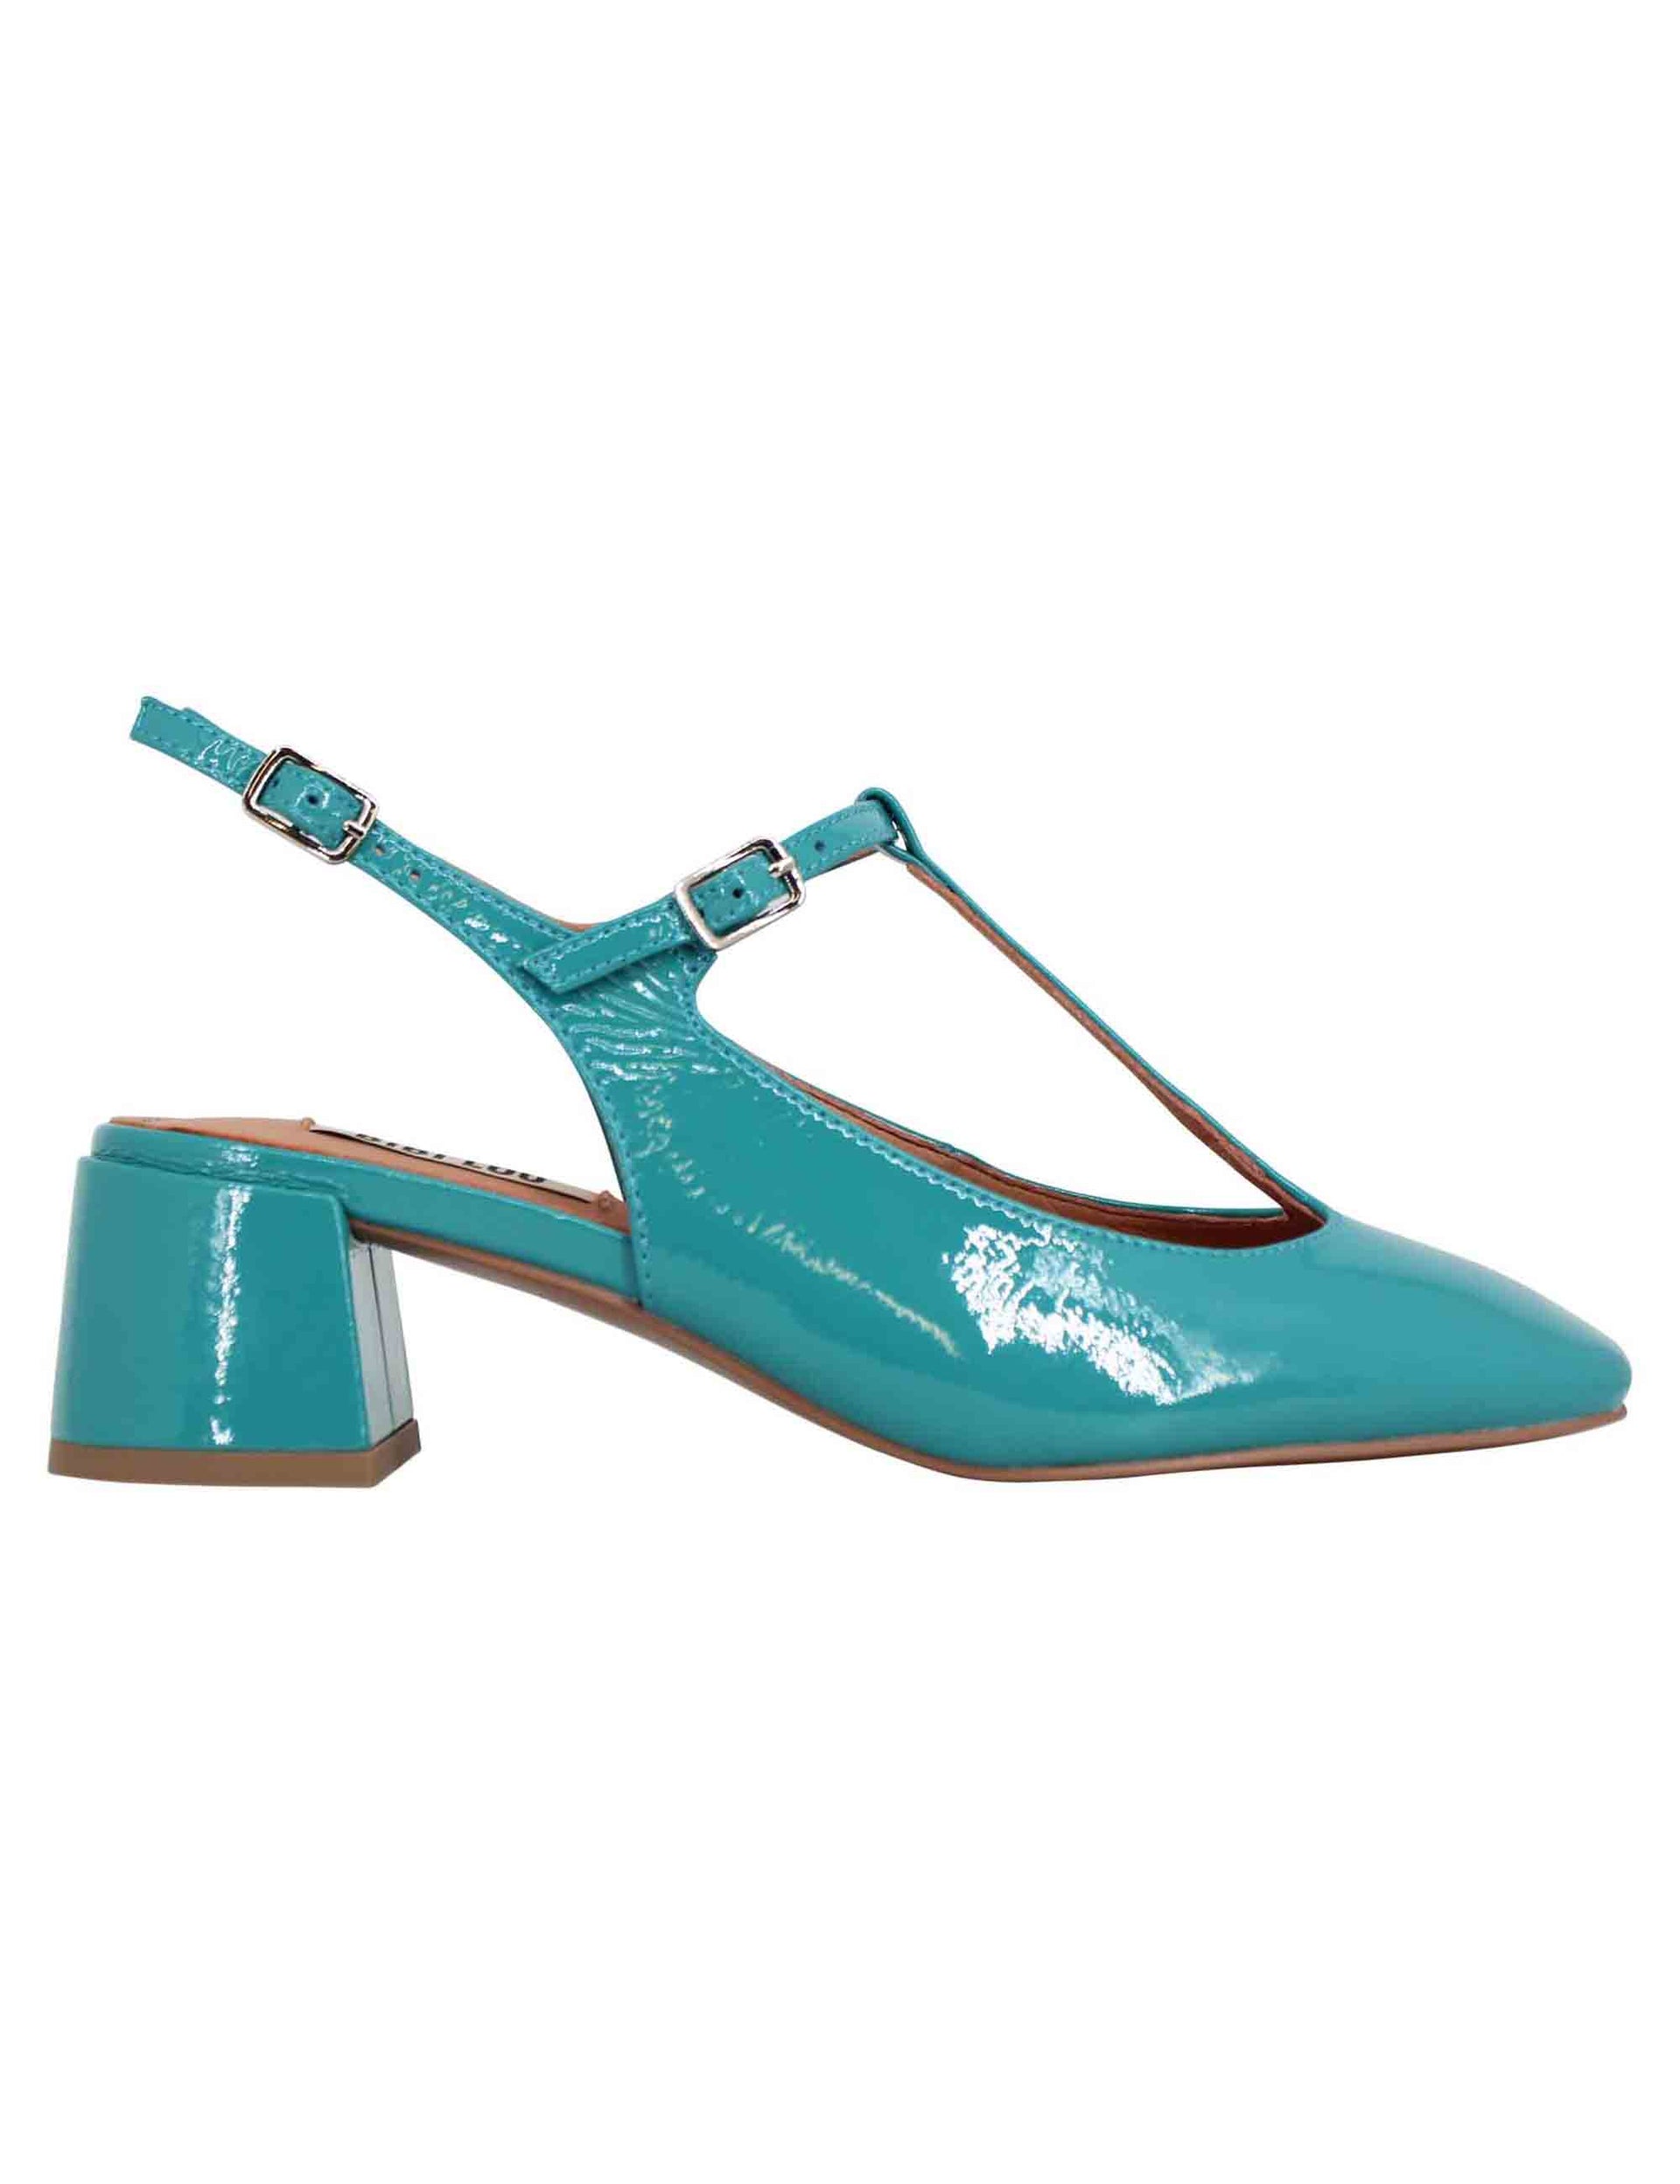 Women's slingback pumps in turquoise patent leather with double Mignon strap